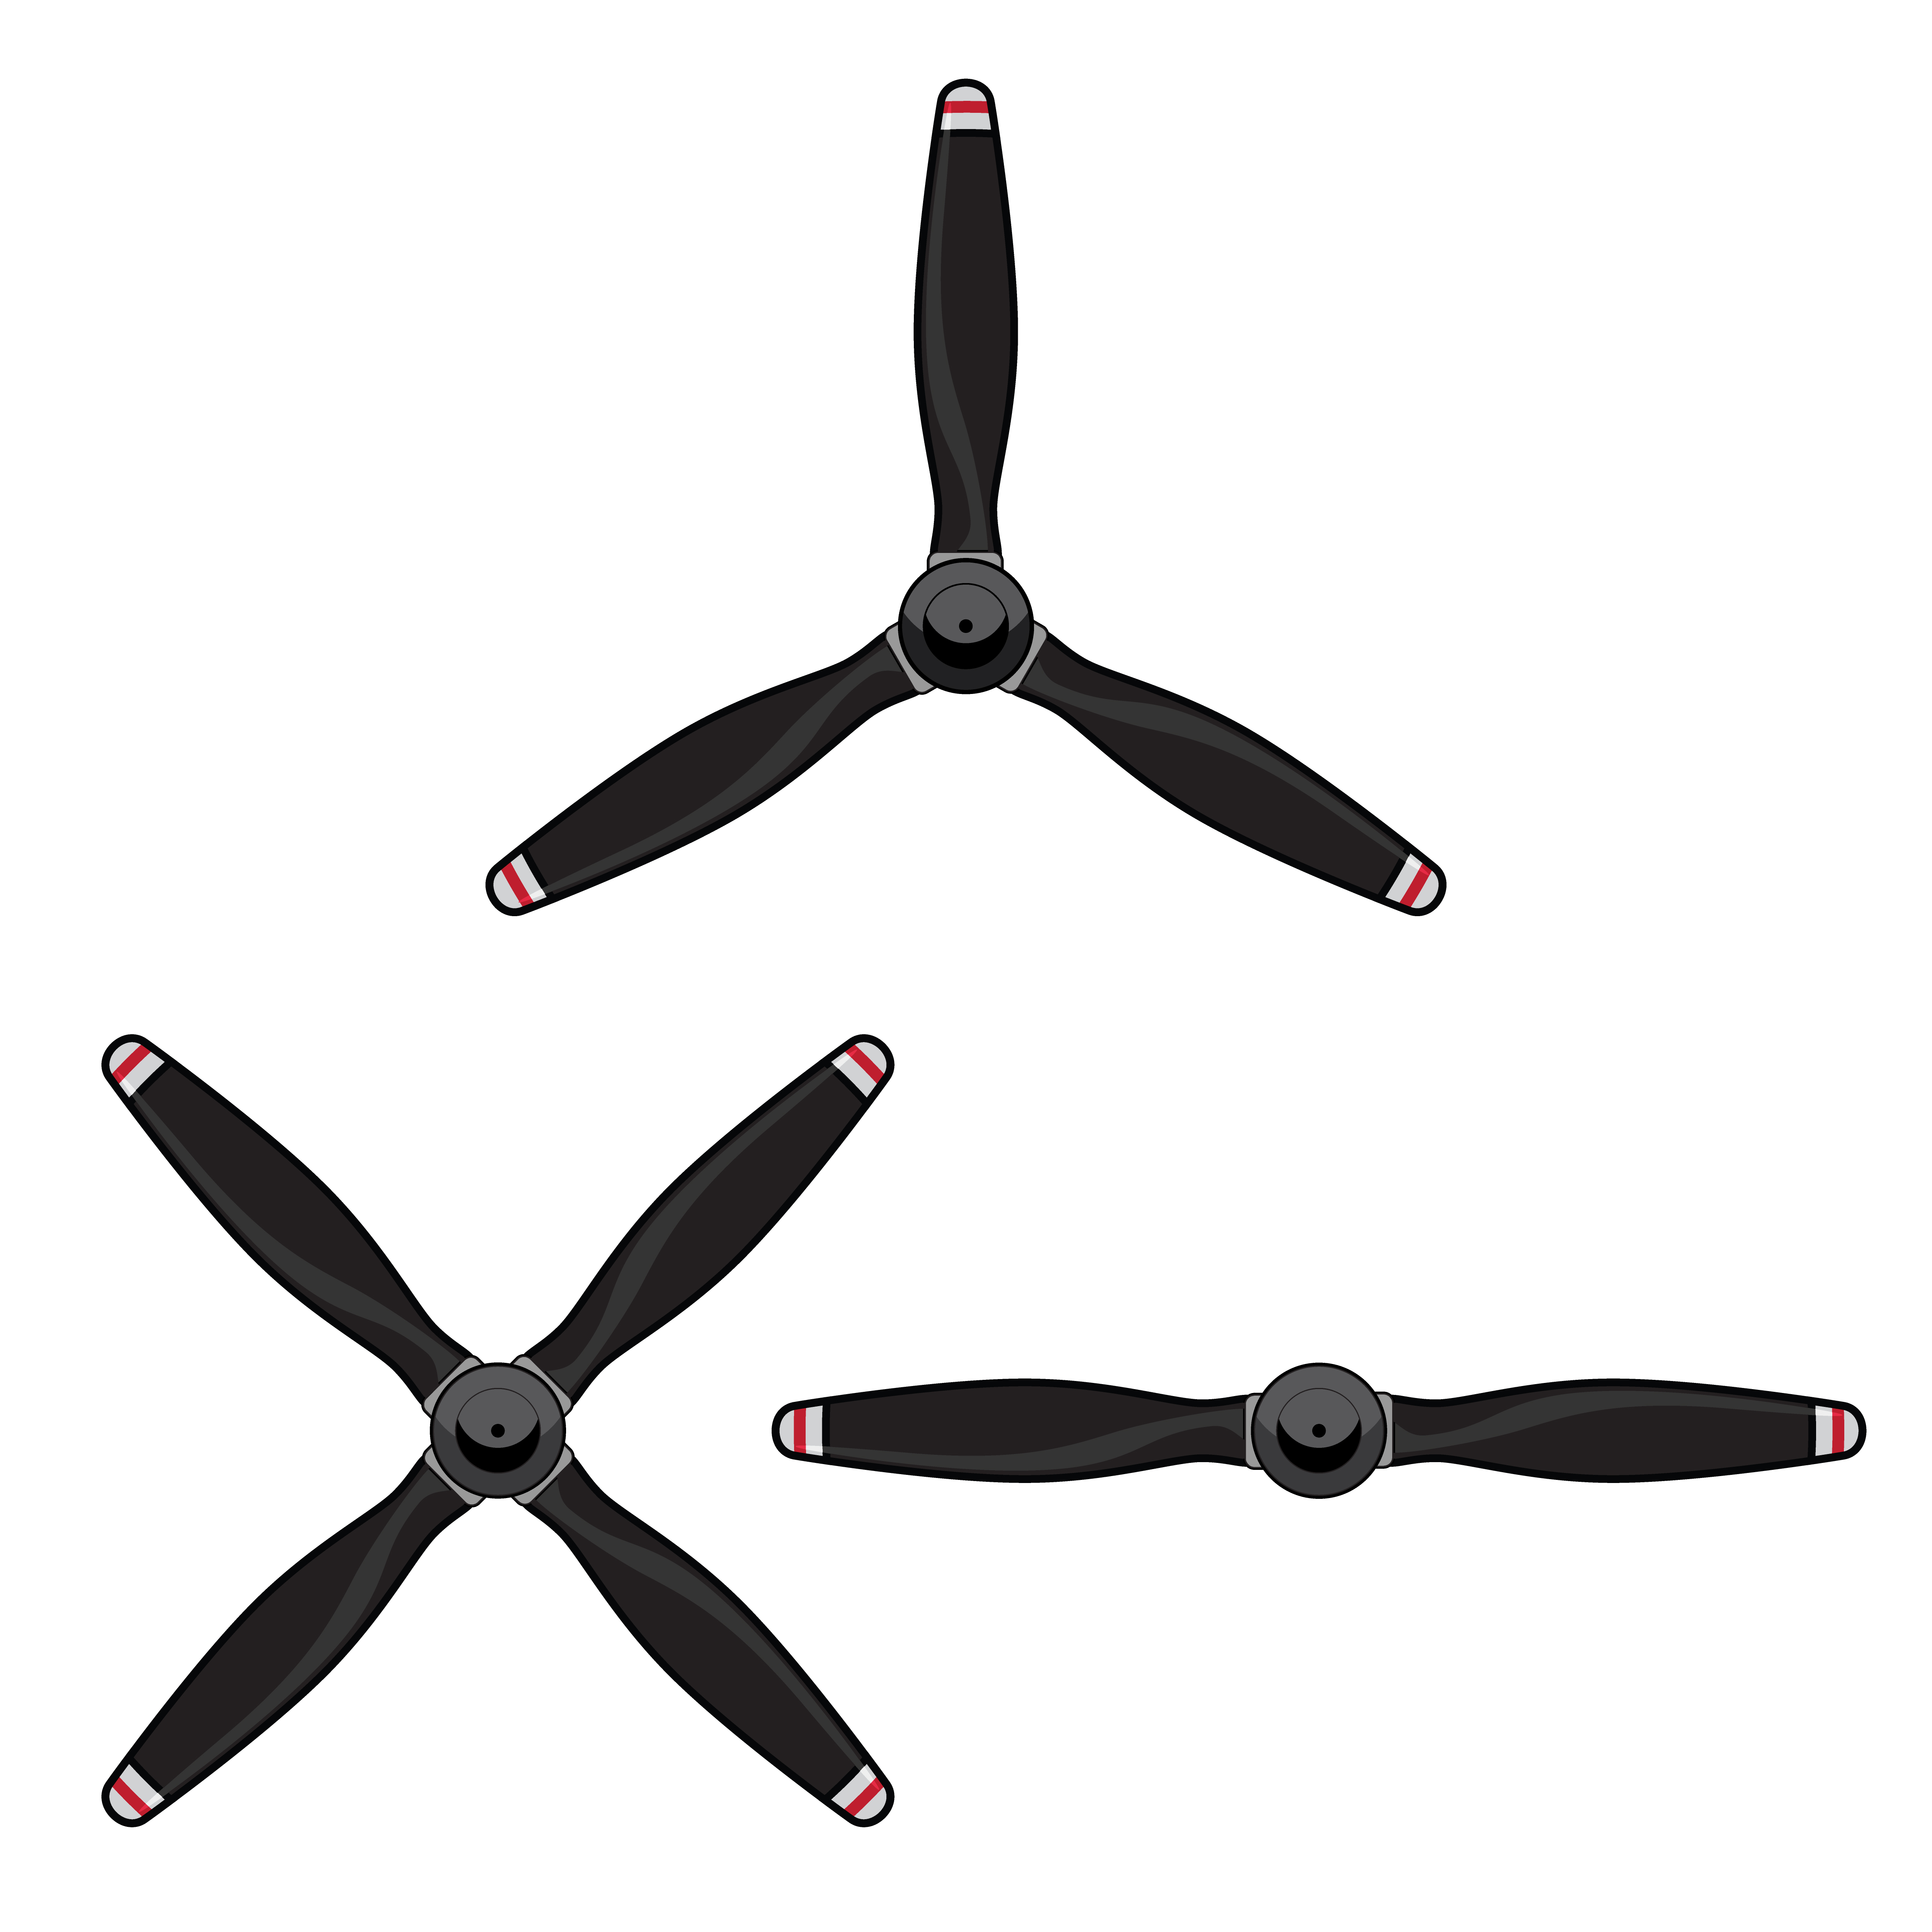 Propeller Clipart Images Free Images At Vector Clip Art | Images and ...